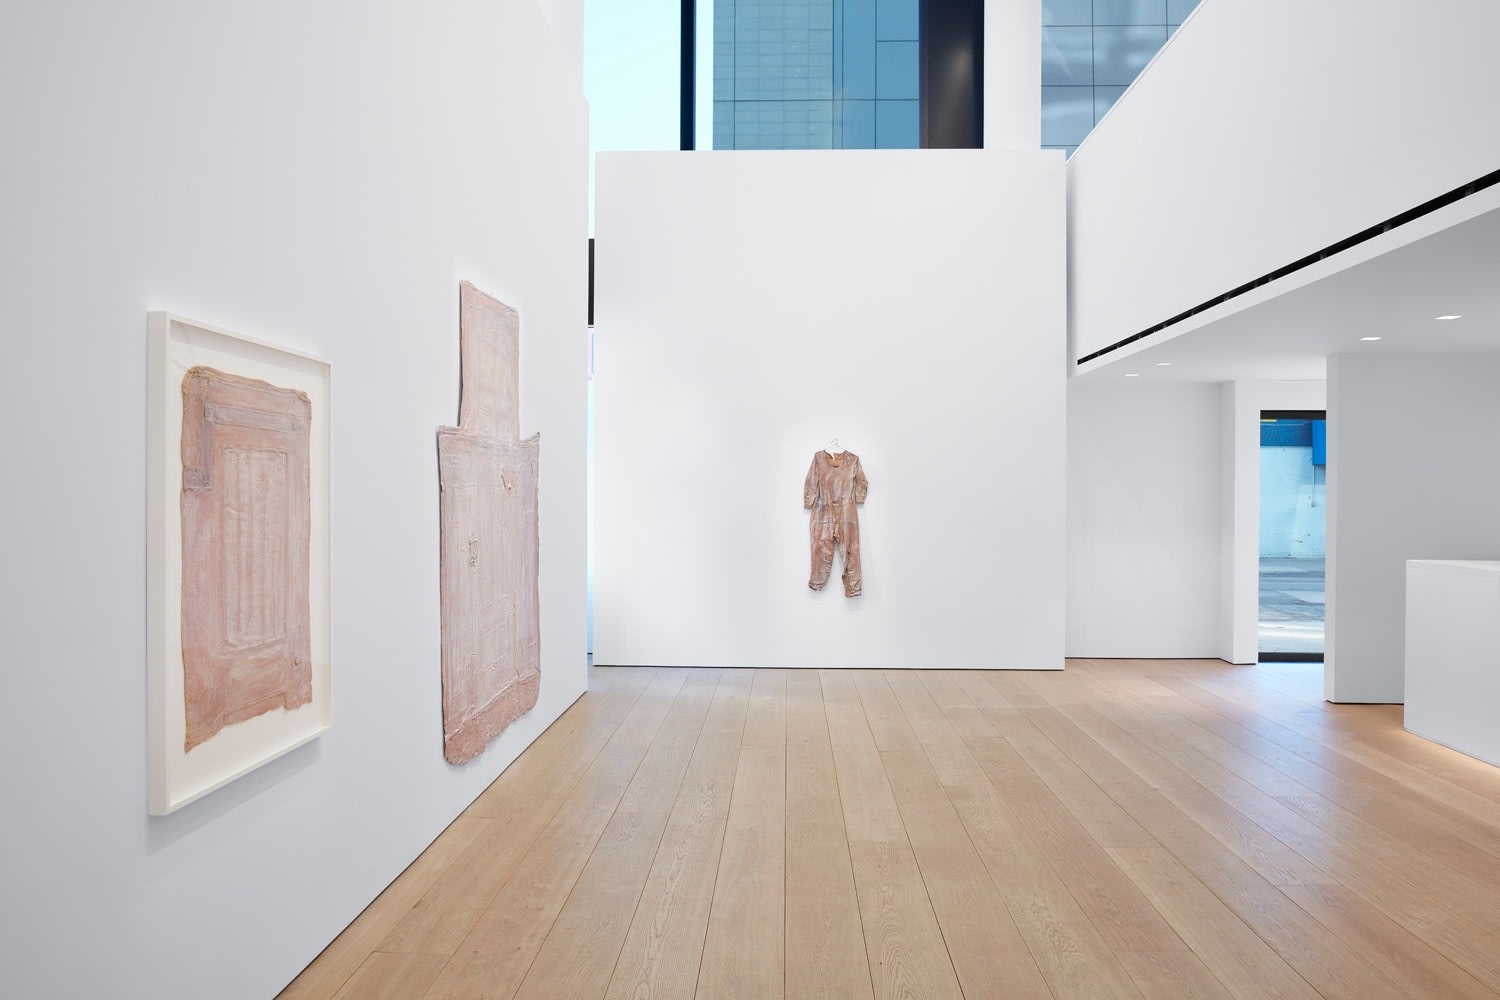 Heidi Bucher, The Site of Memory, Installation view at Lehmann Maupin, New York